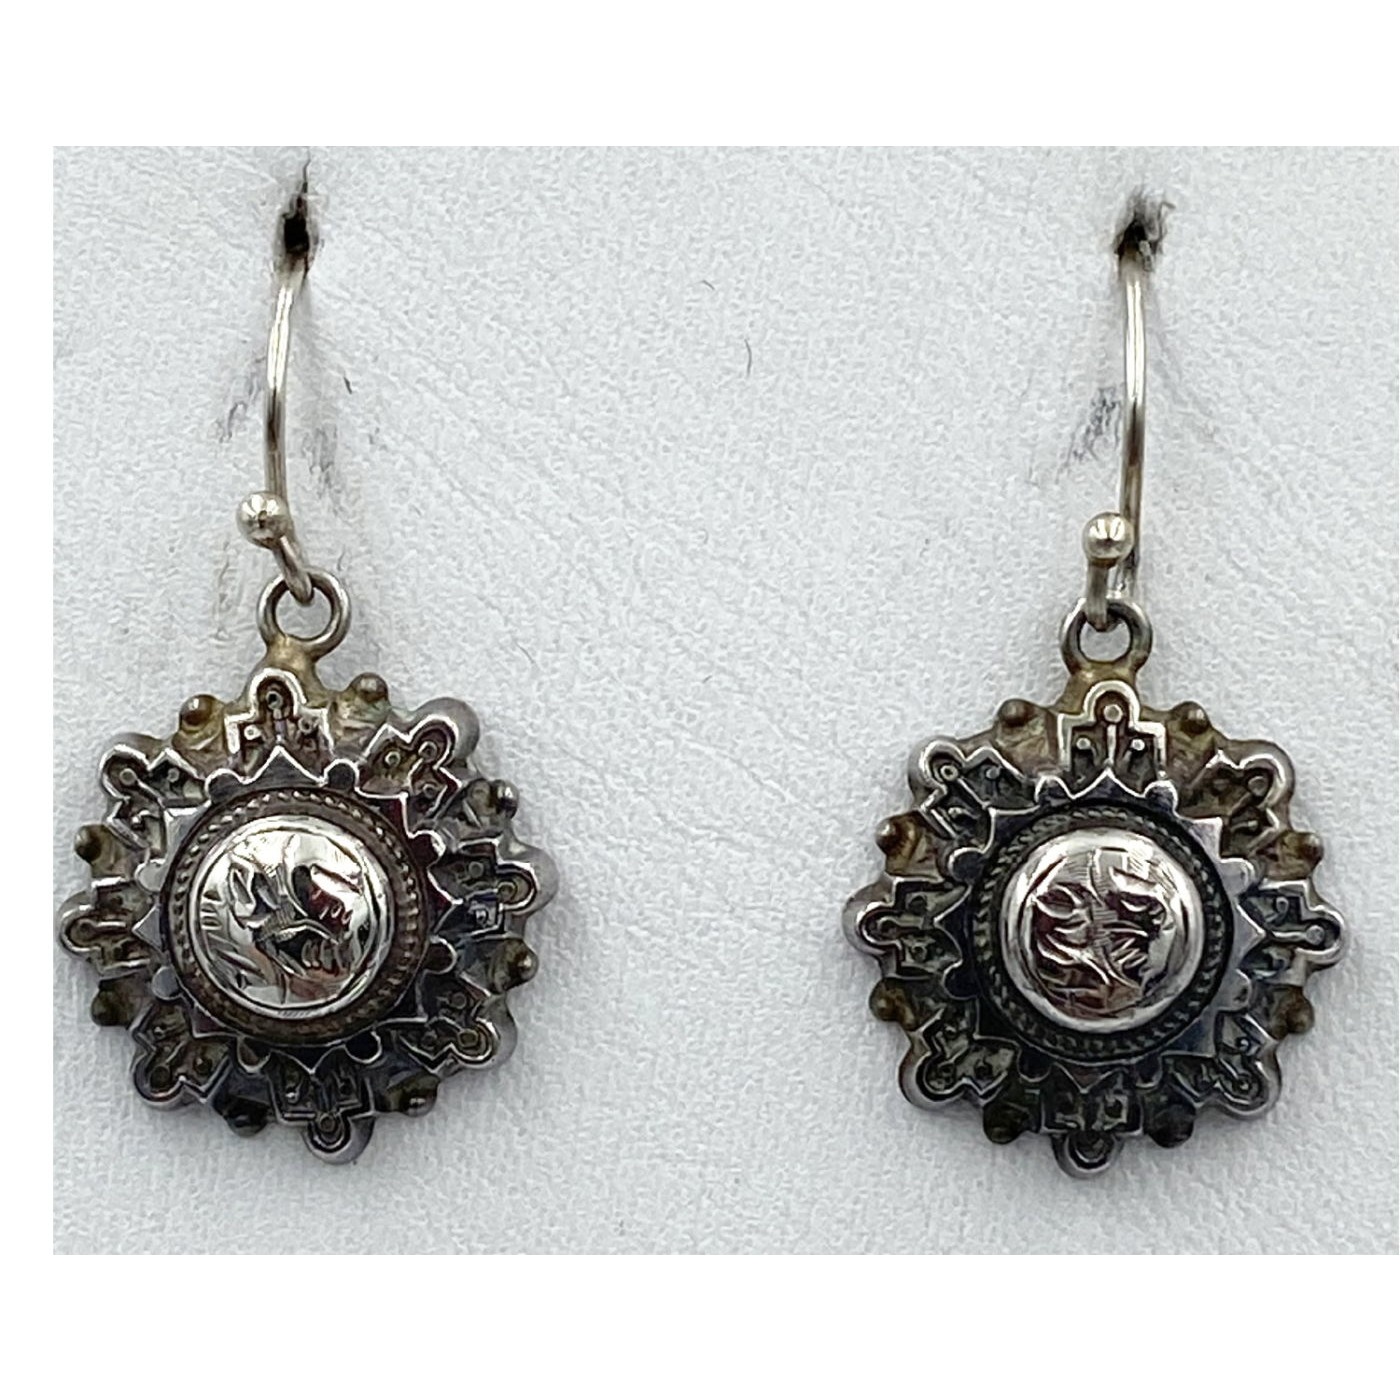 Layered Starburst Victorian English Silver Earrings